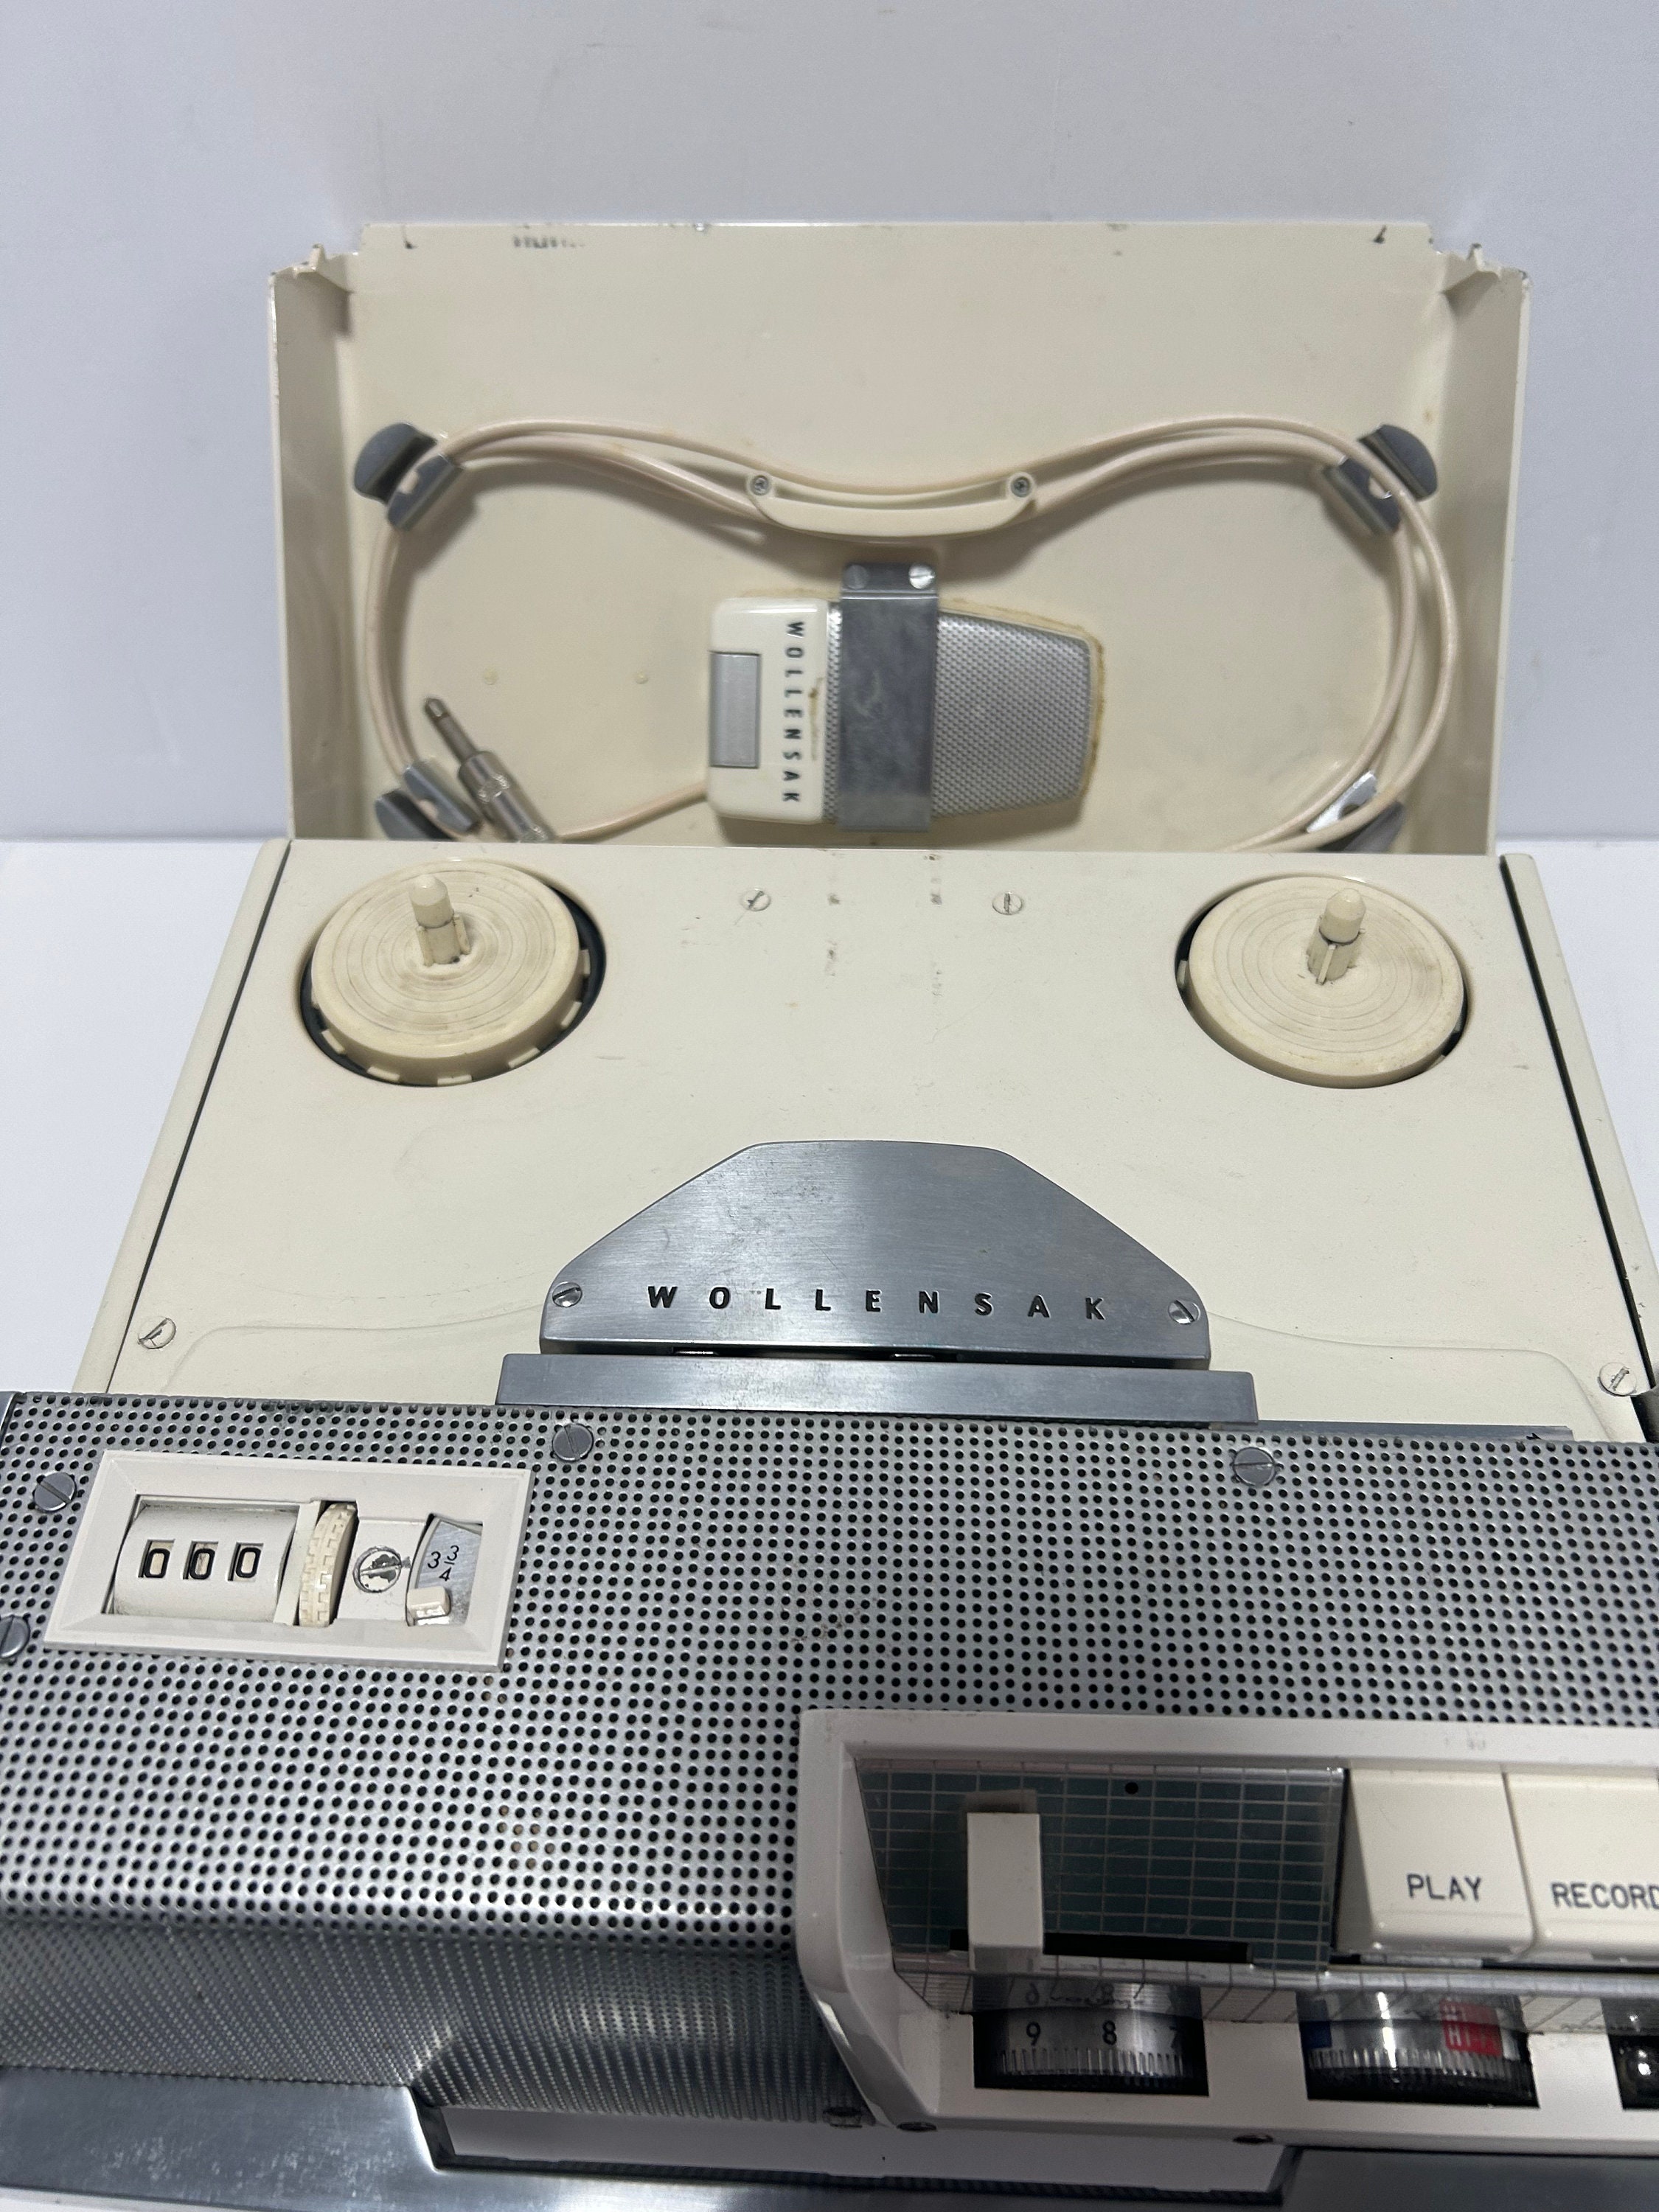 Premium Photo  Analog stereo open reel tape deck recorder player with  metal reelsvintage analog stereo reel deck